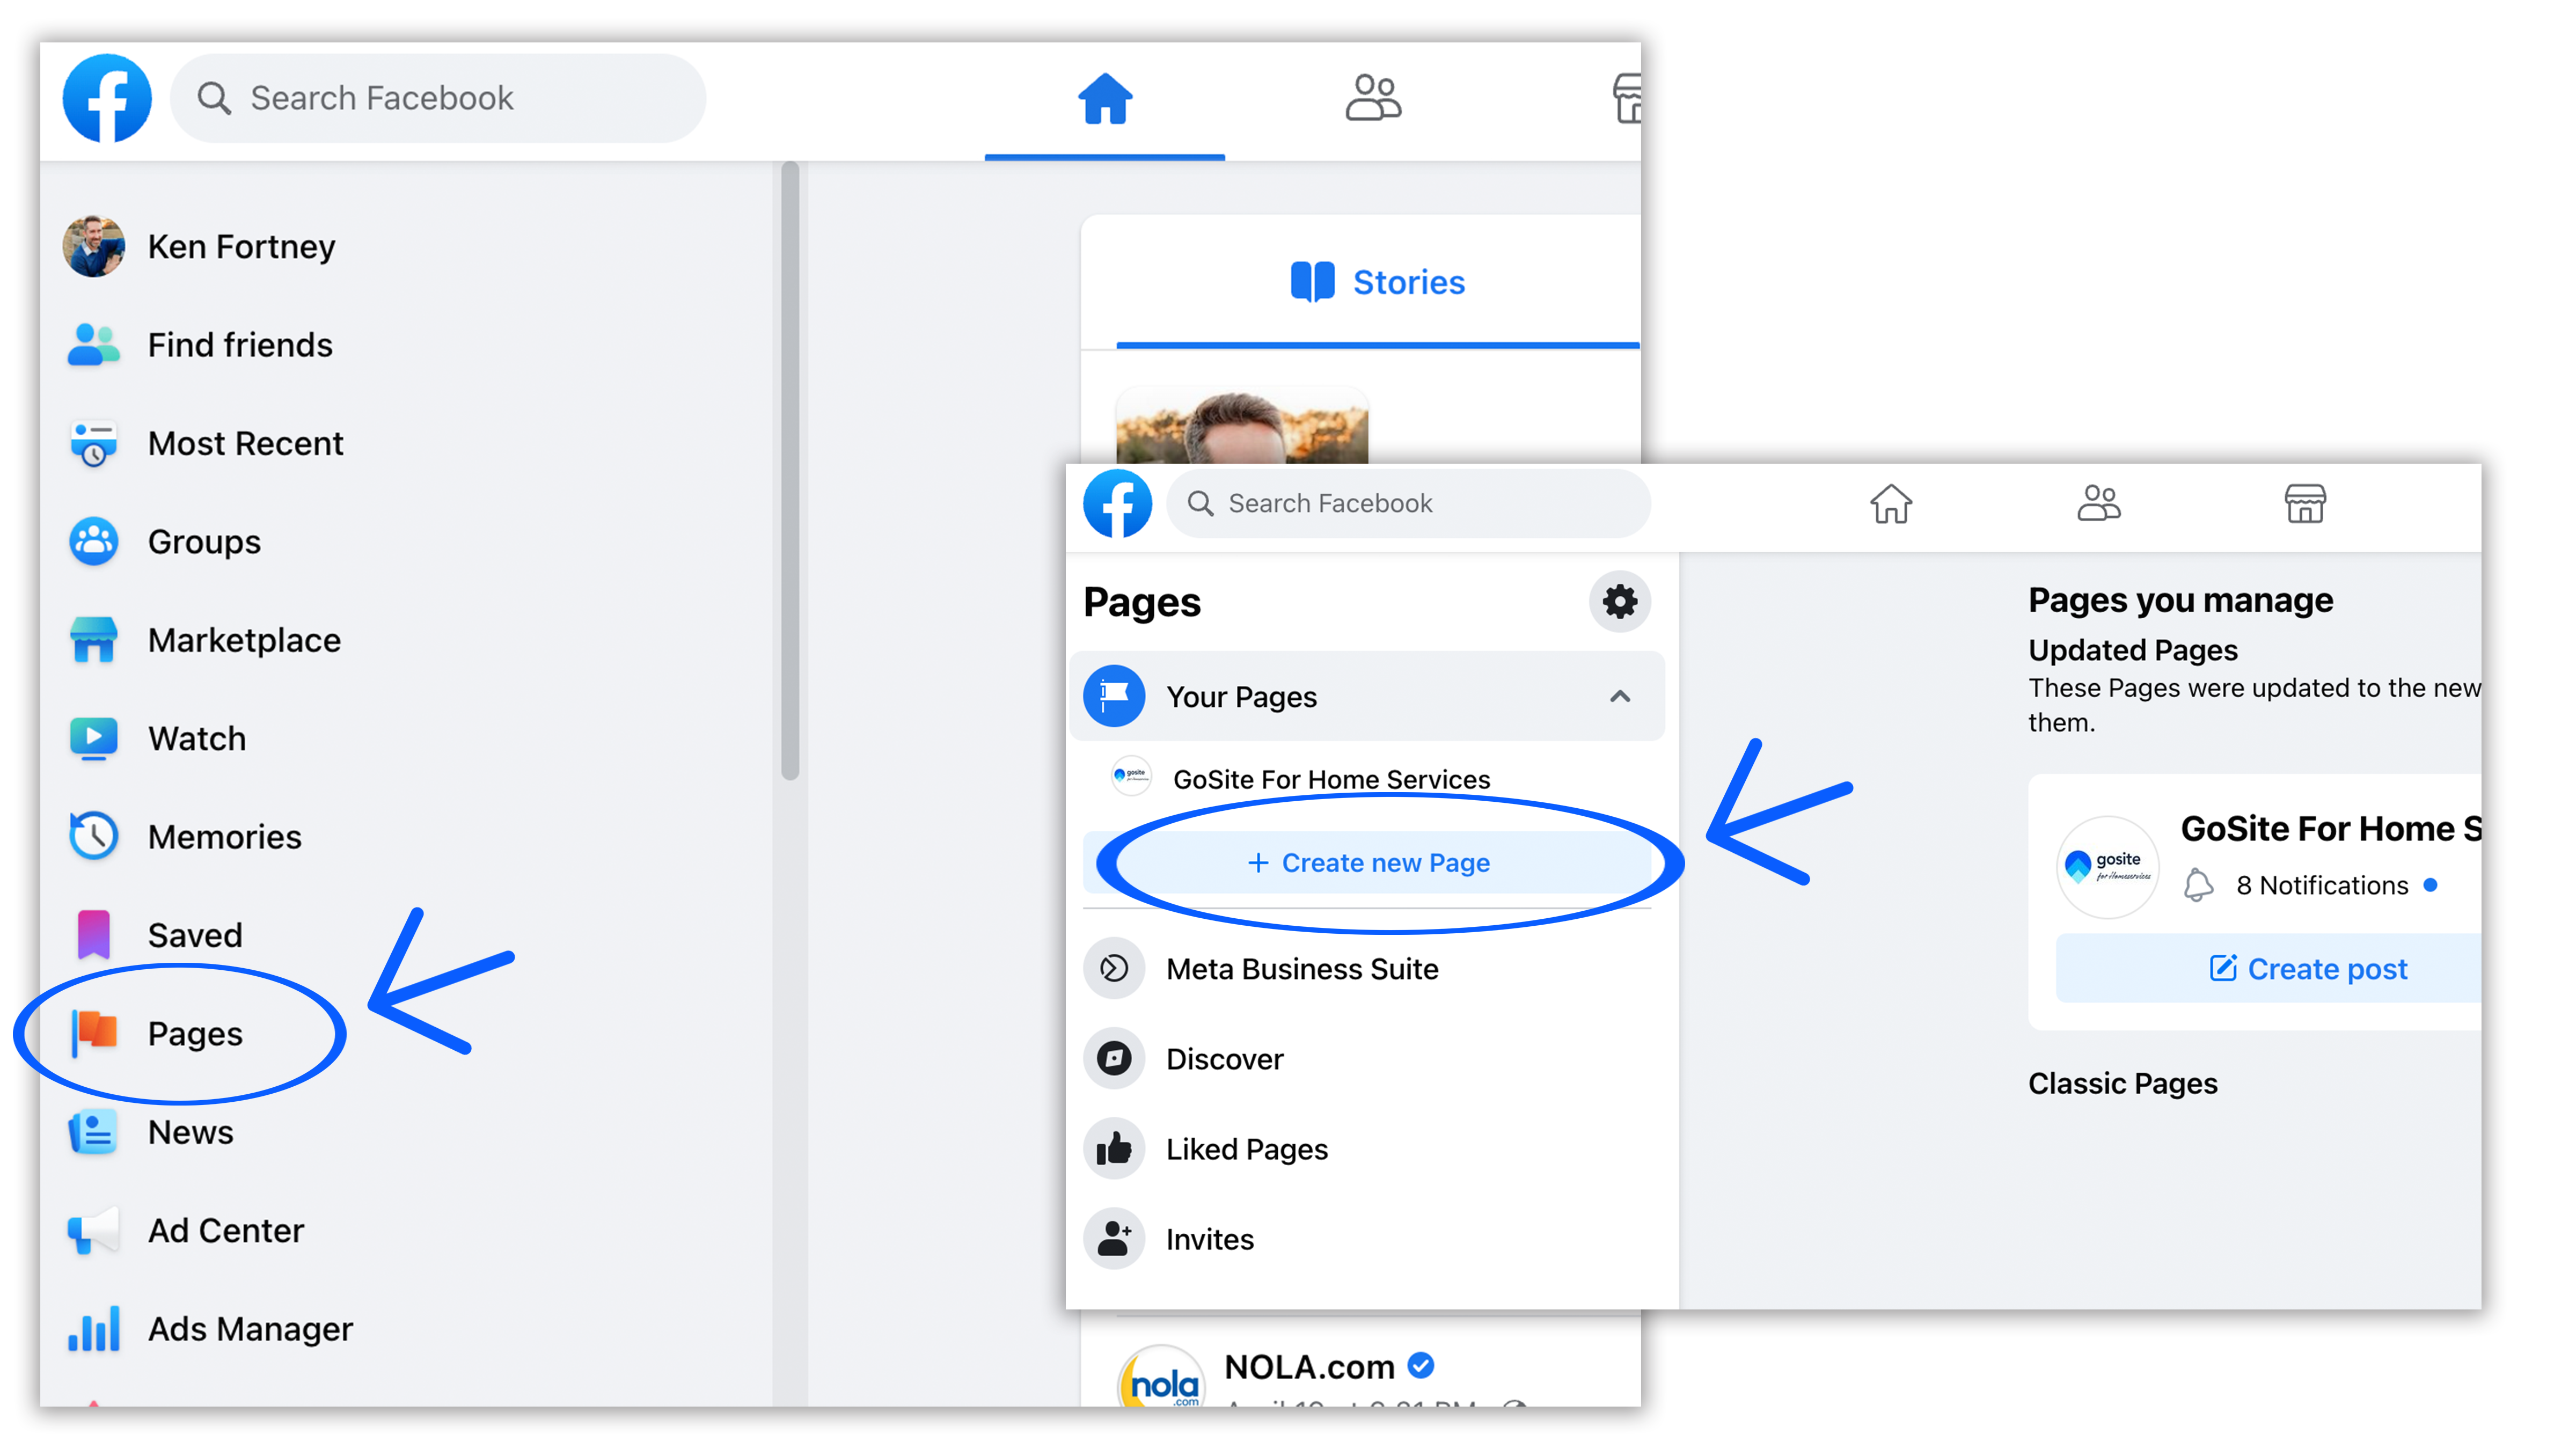 How To Remove Meta Business Suite From Facebook Page (2023) - Easy Fix 